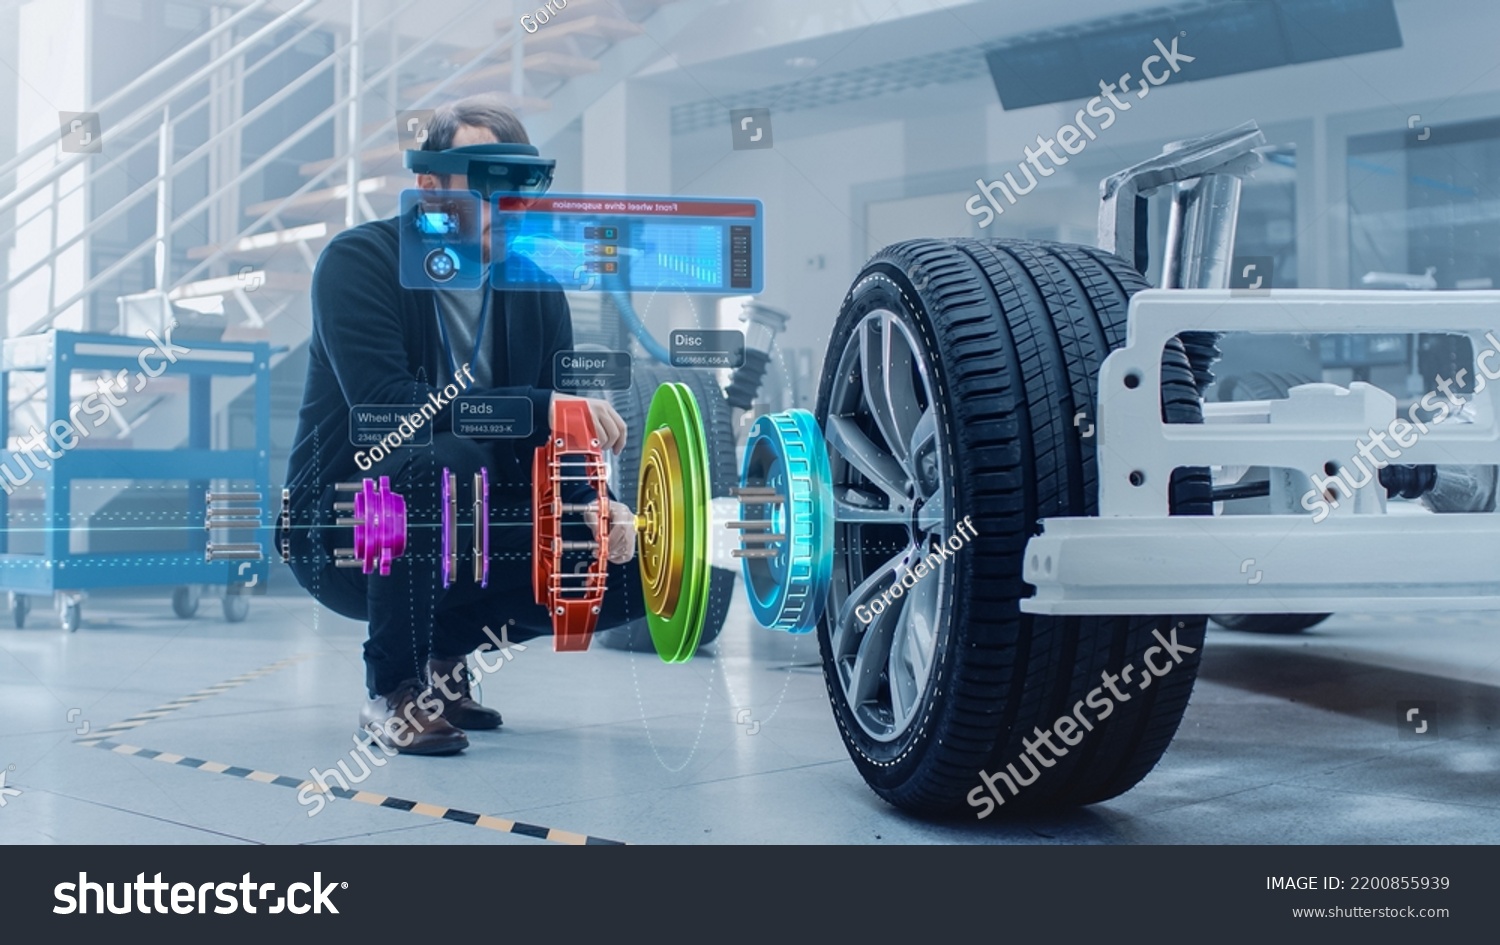 Automotive Engineer Working on Electric Car Chassis Platform, Using Augmented Reality Headset with 3D VFX Software for Development of Regenerative Braking System on a Transport Vehicle. #2200855939